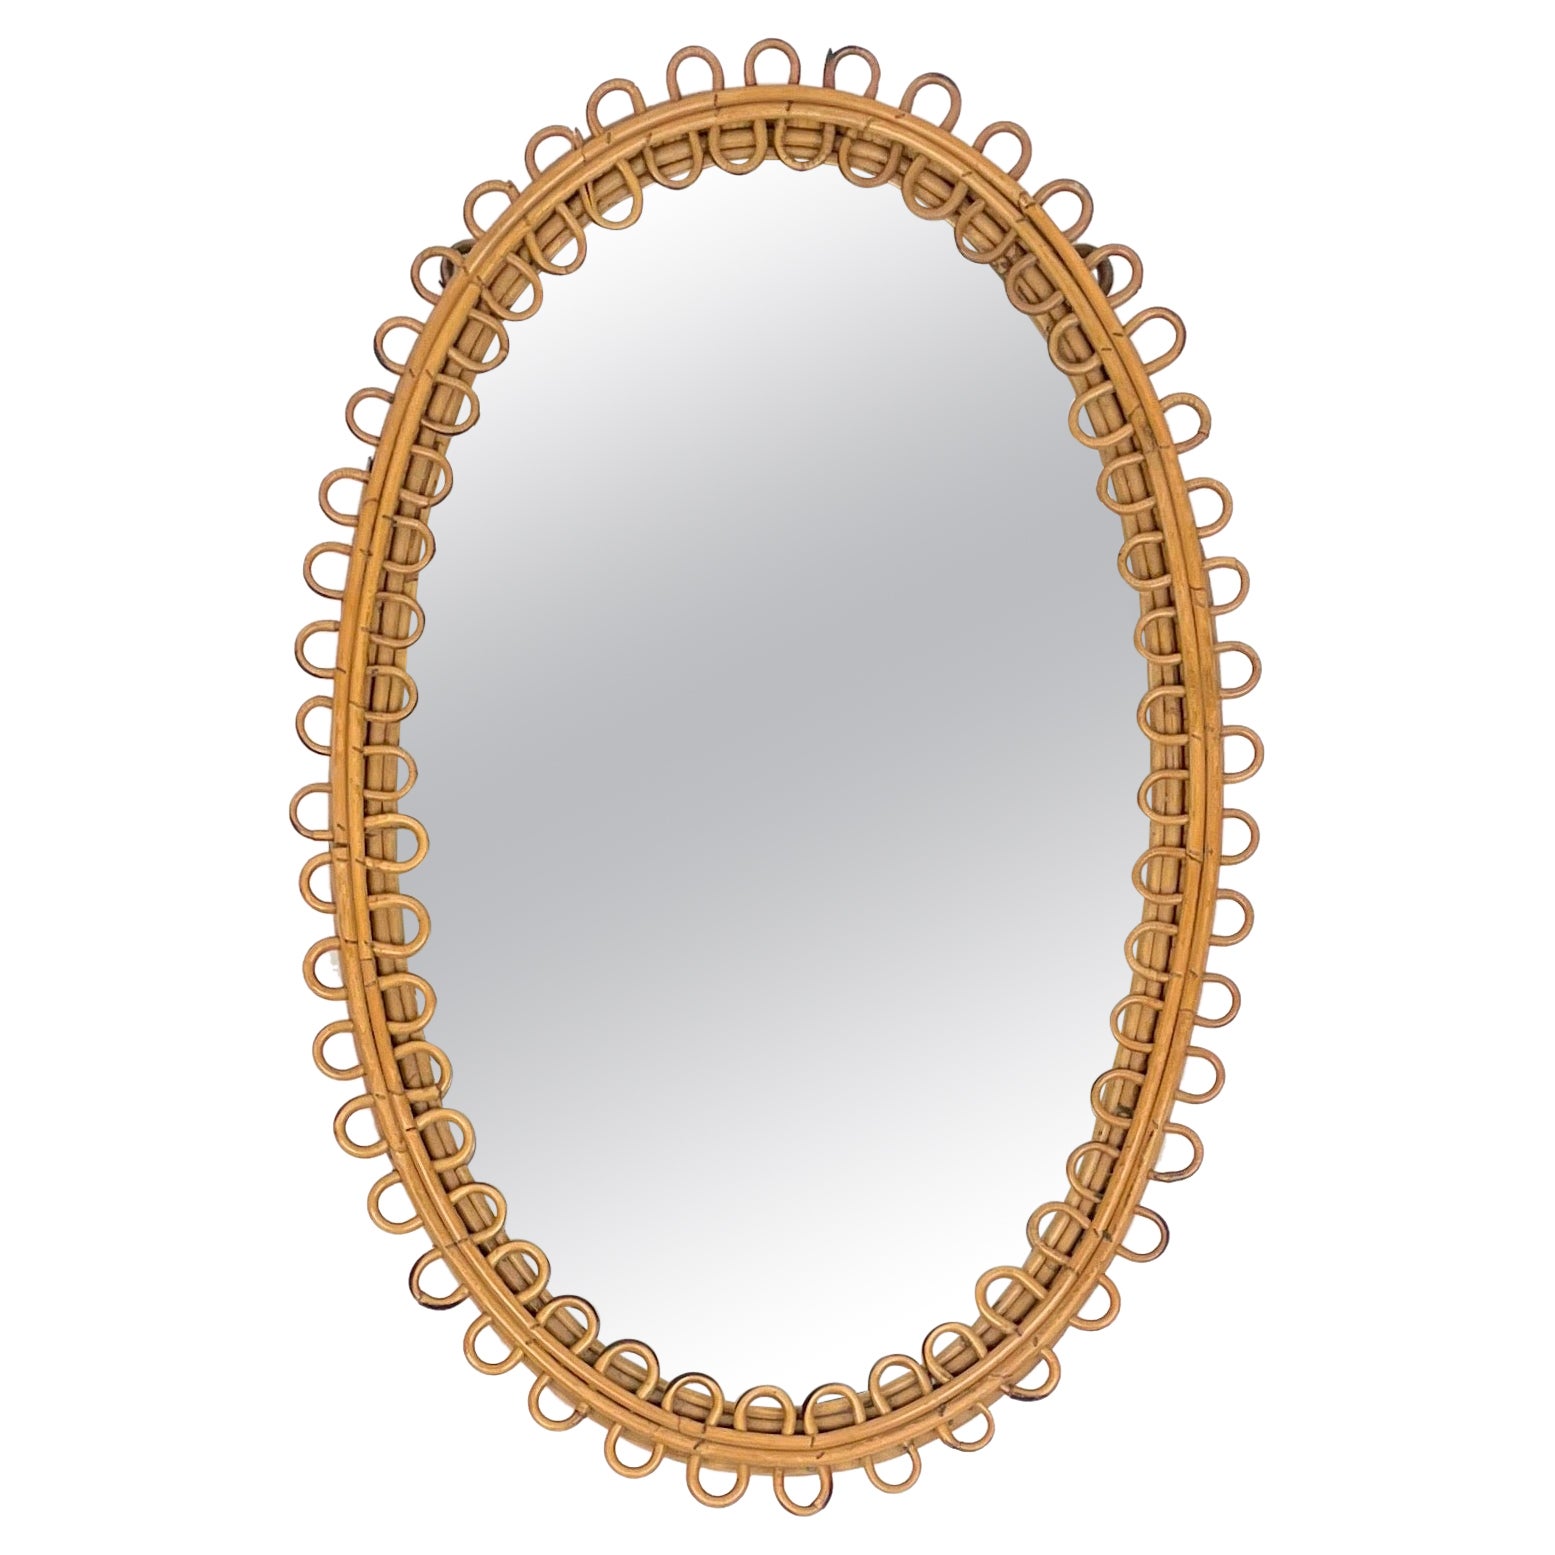 Midcentury Rattan and Bamboo Oval Wall Mirror, Italy, 1960s